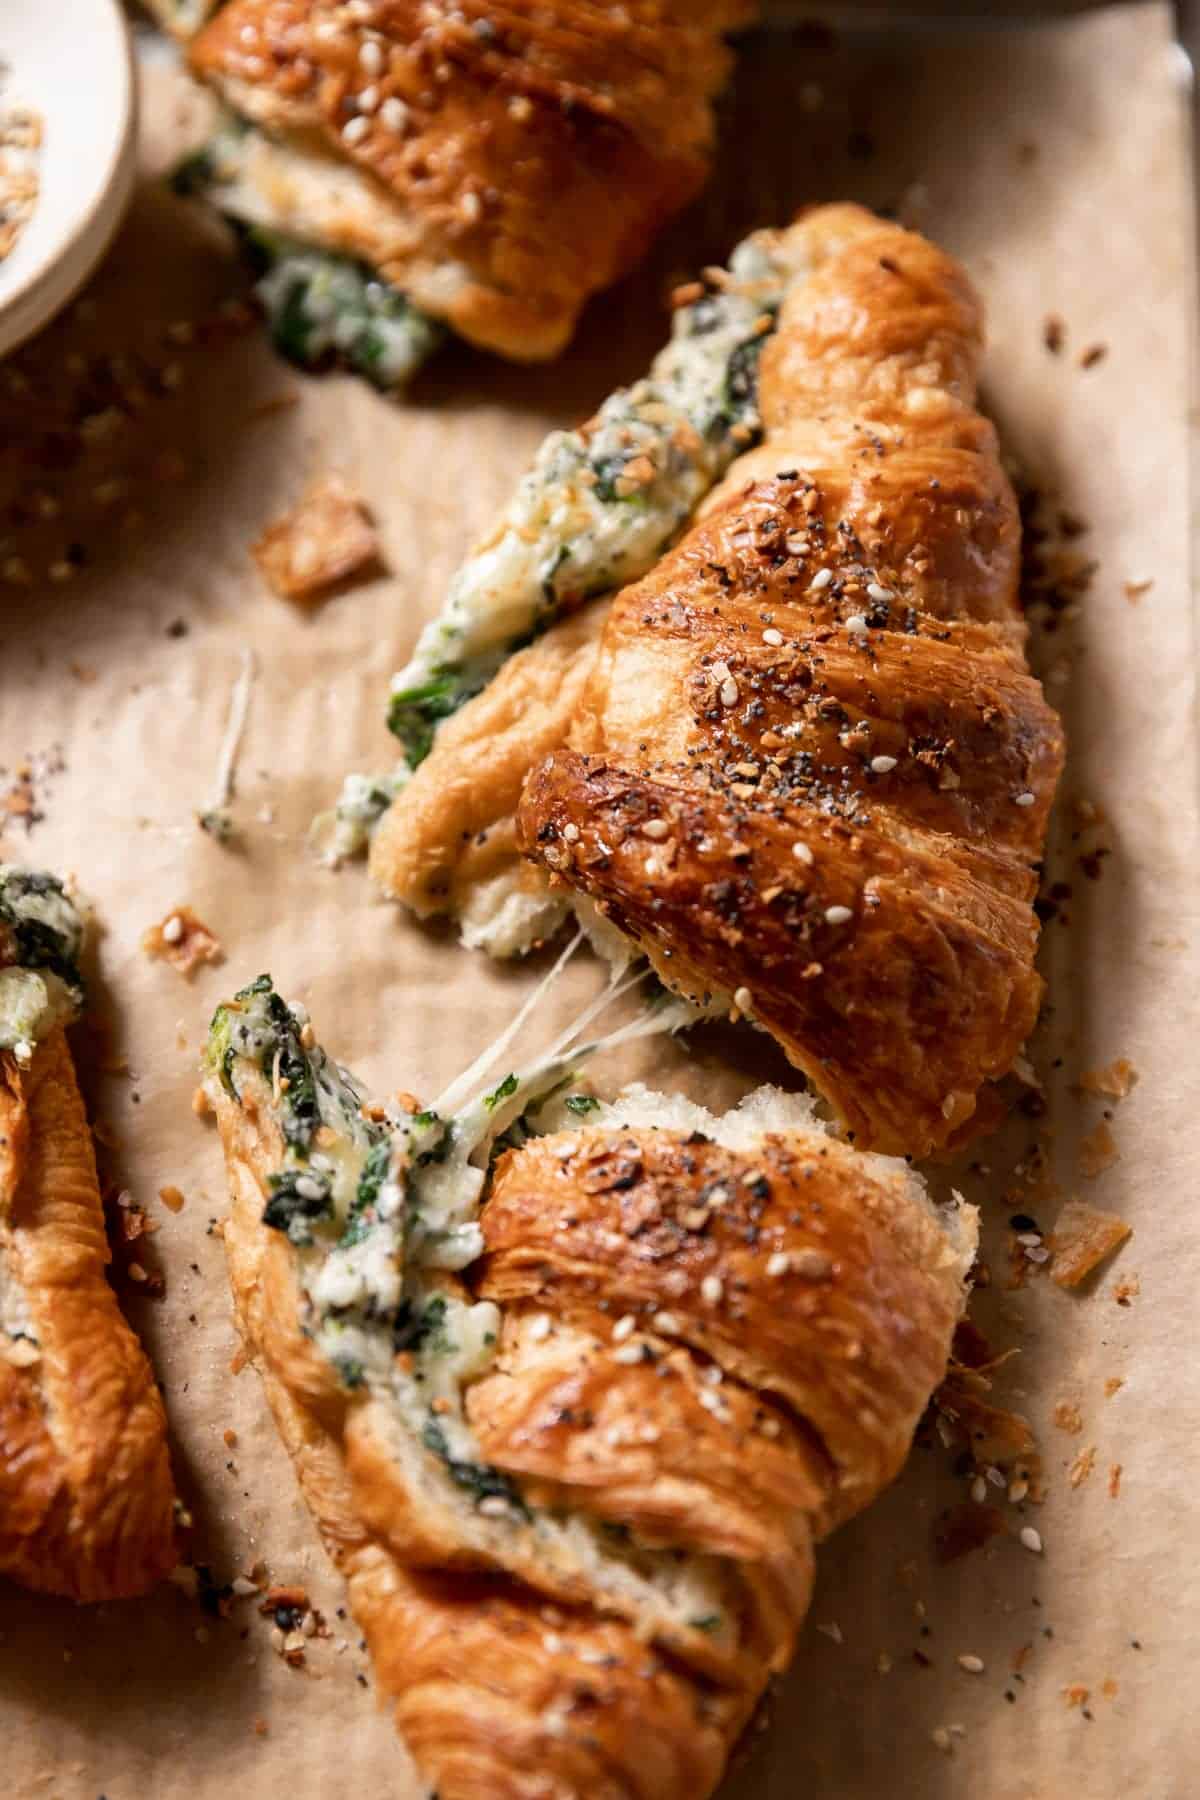 baked croissant with cheese and spinach filling.